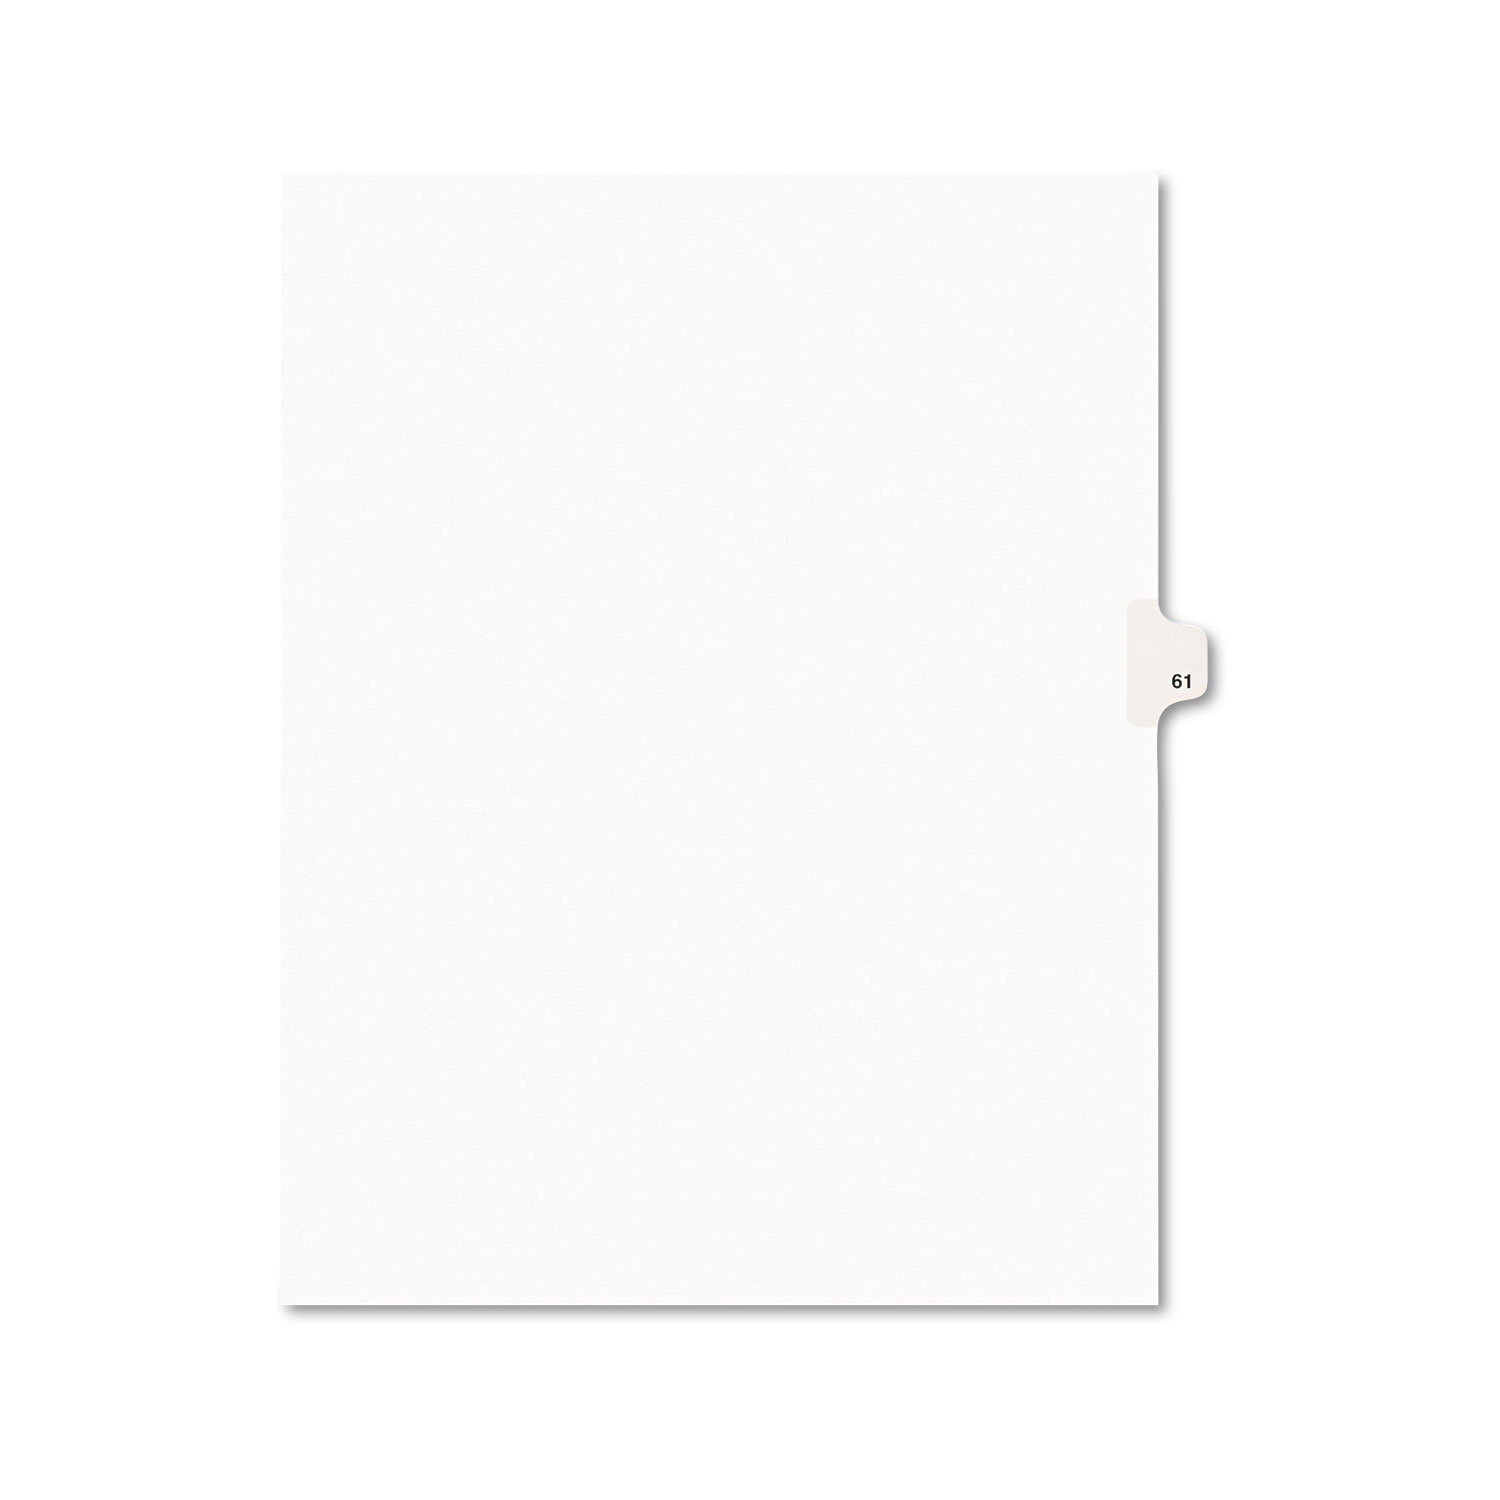  Avery 01061 Preprinted Legal Exhibit Side Tab Index Dividers, Avery Style, 10-Tab, 61, 11 x 8.5, White, 25/Pack (AVE01061) 